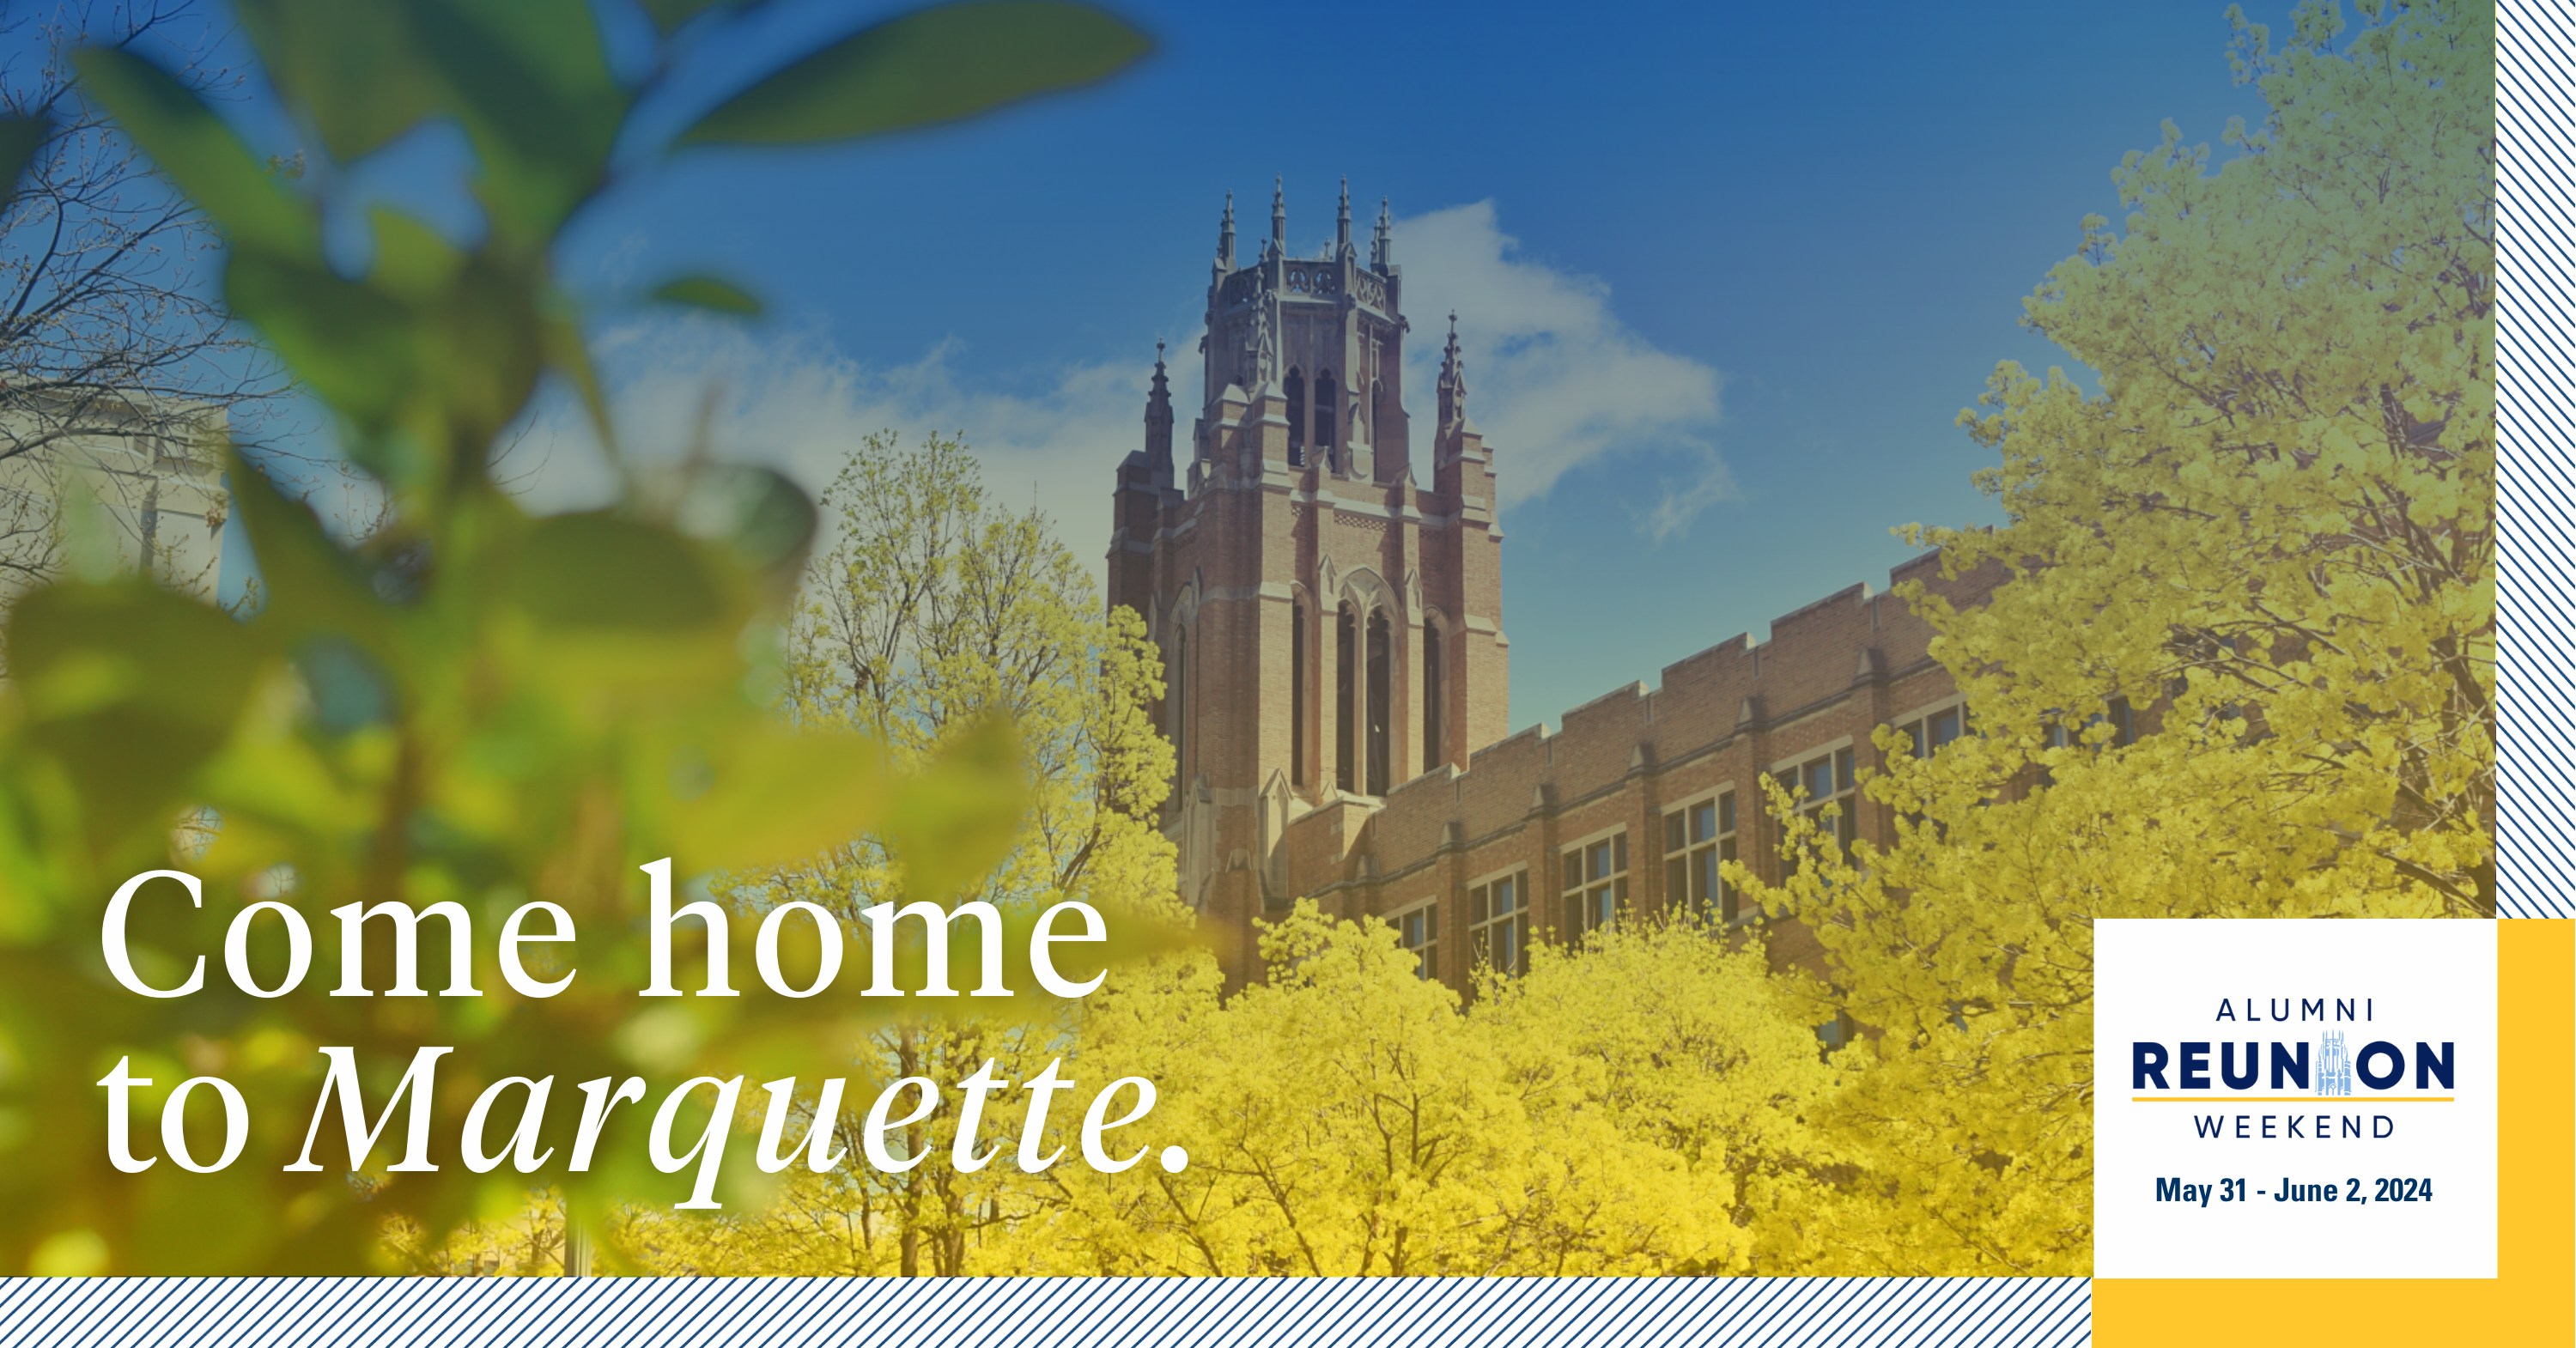 Come home to Marquette for Alumni Reunion Weekend.